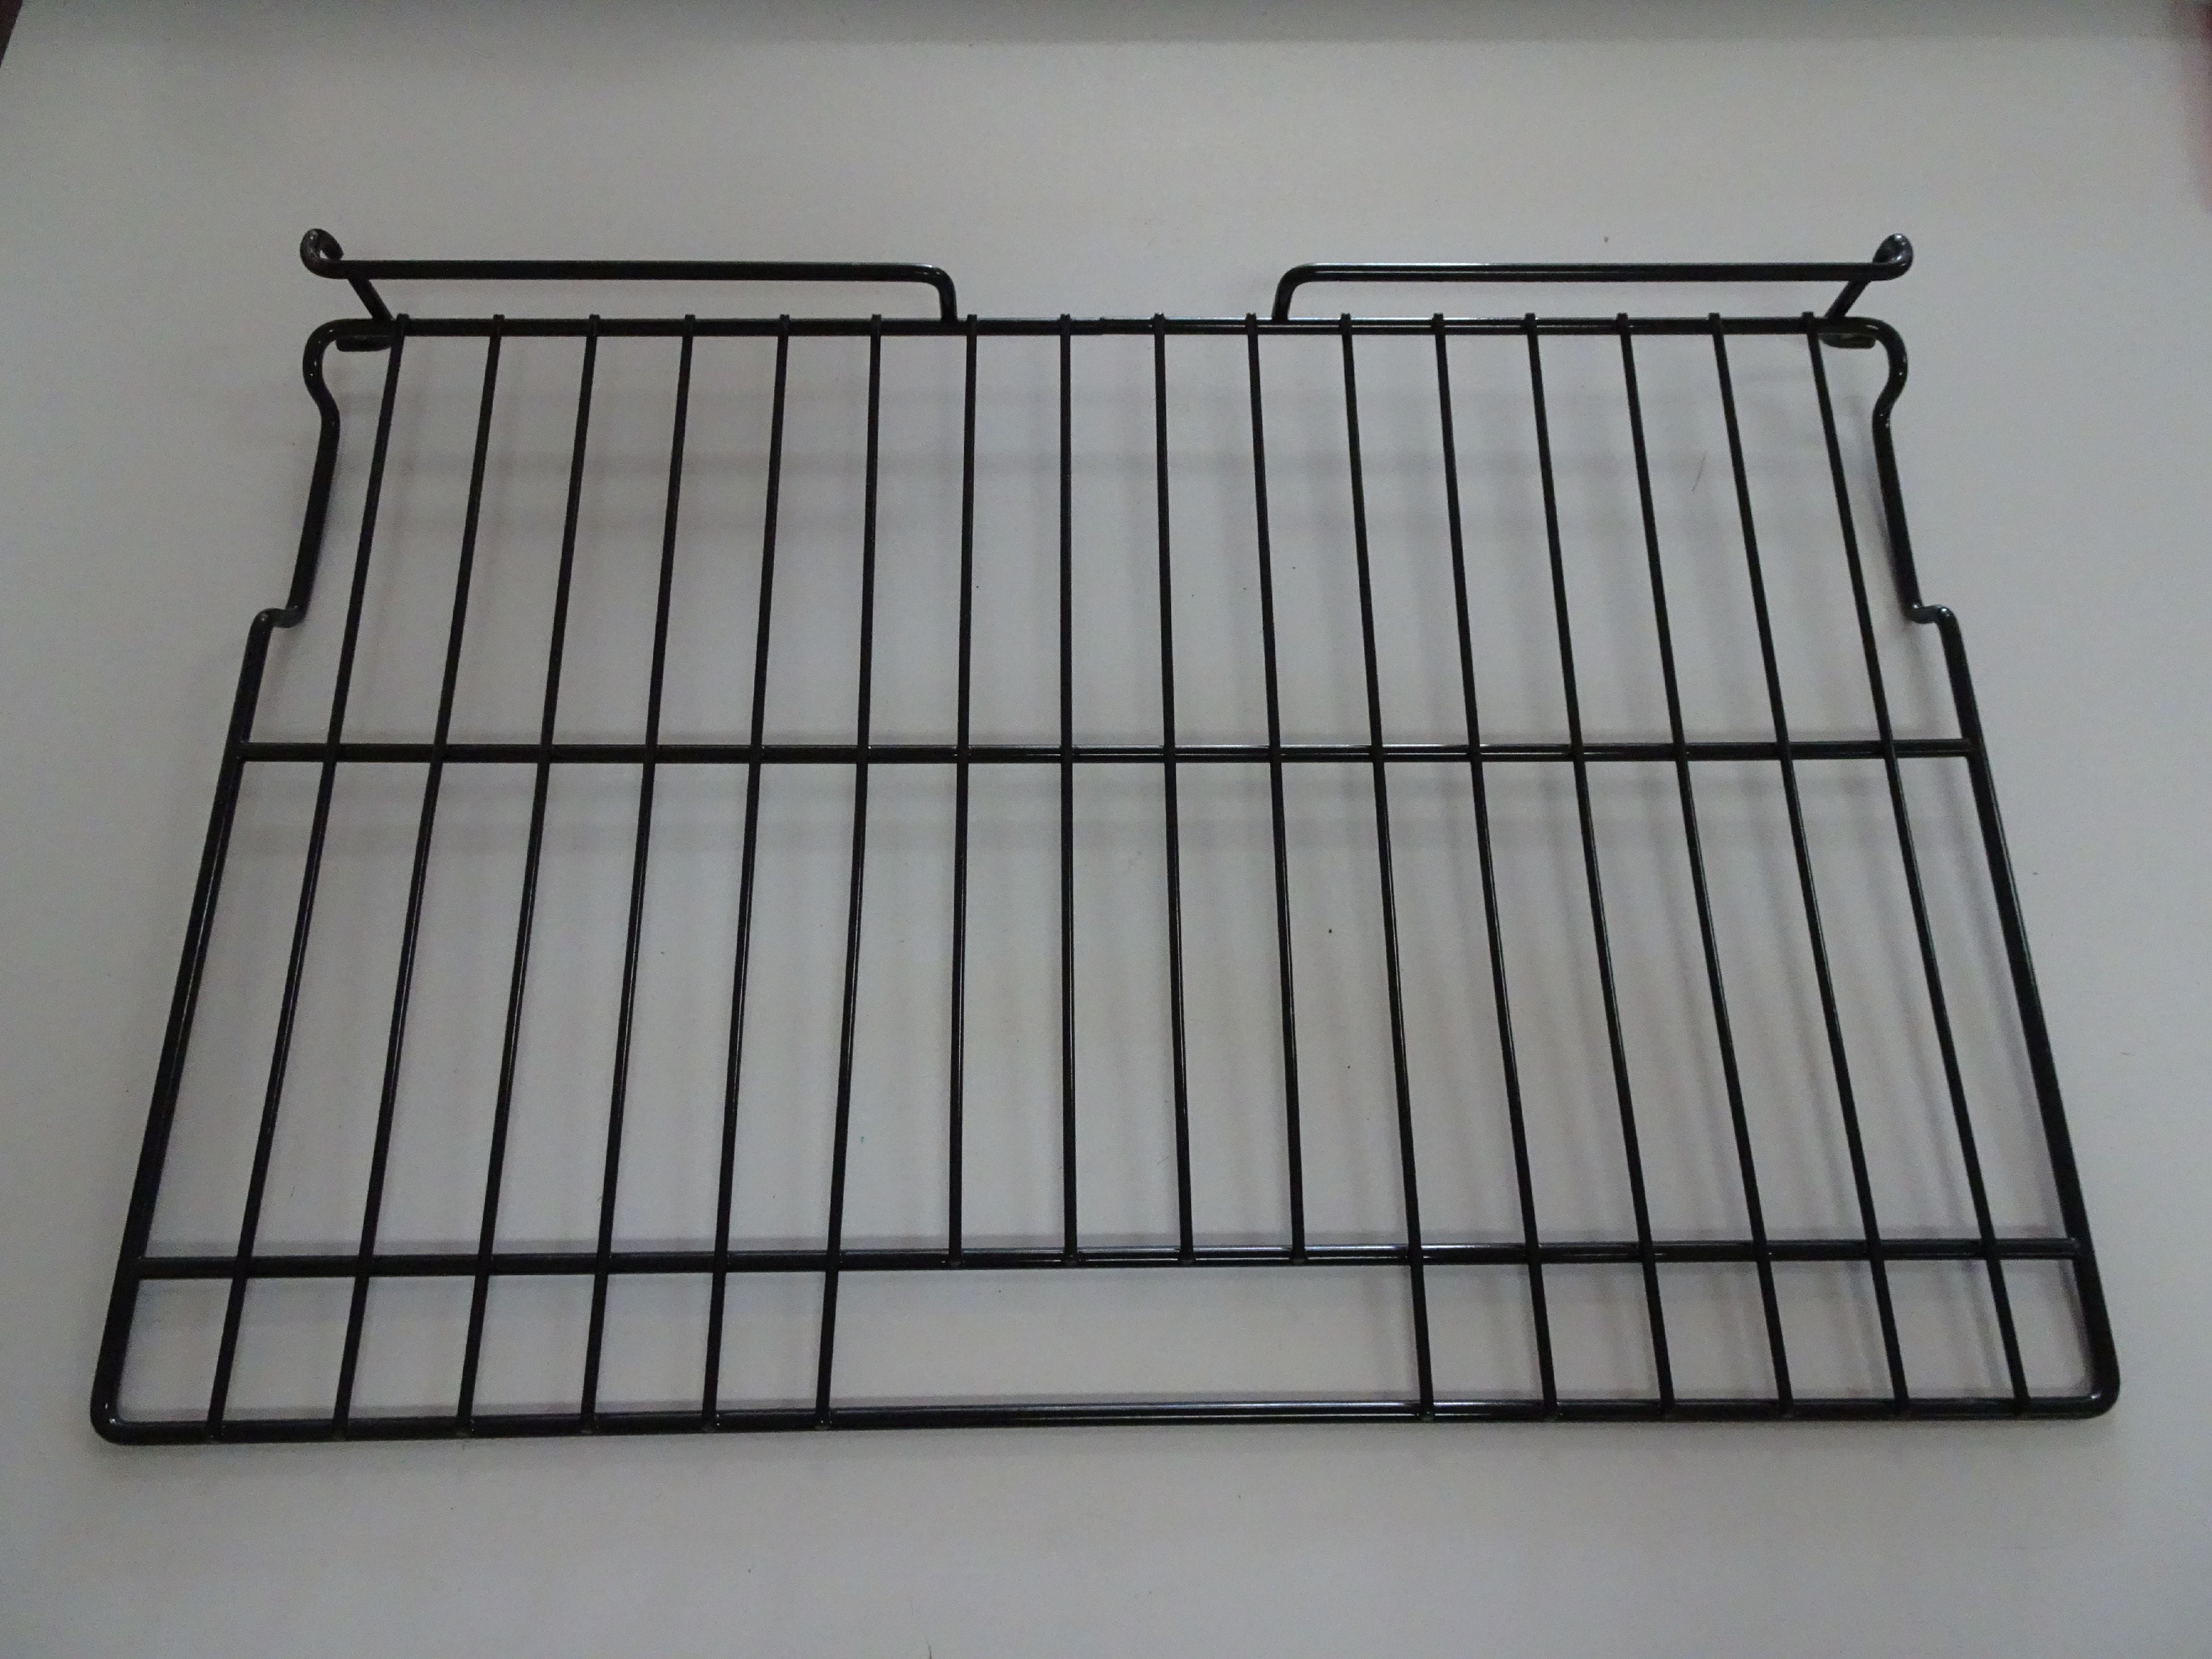 Americana GE Range Oven Rack Some Stains/Aging Part # WB48K5019 